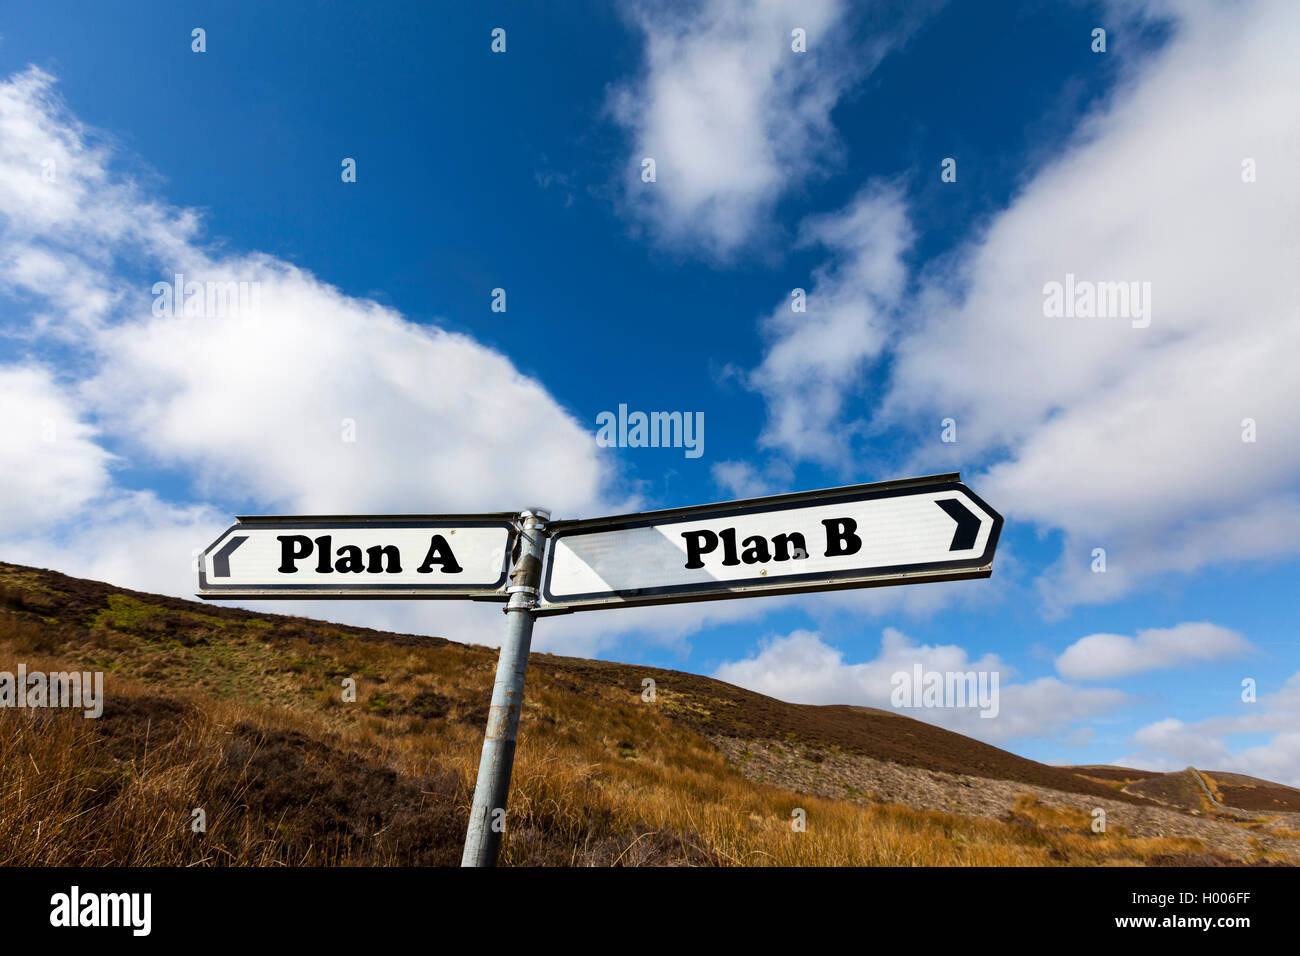 plan a plan b concept road sign choice choose life direction future unsure alternative plan another choice concepts signs Stock Photo